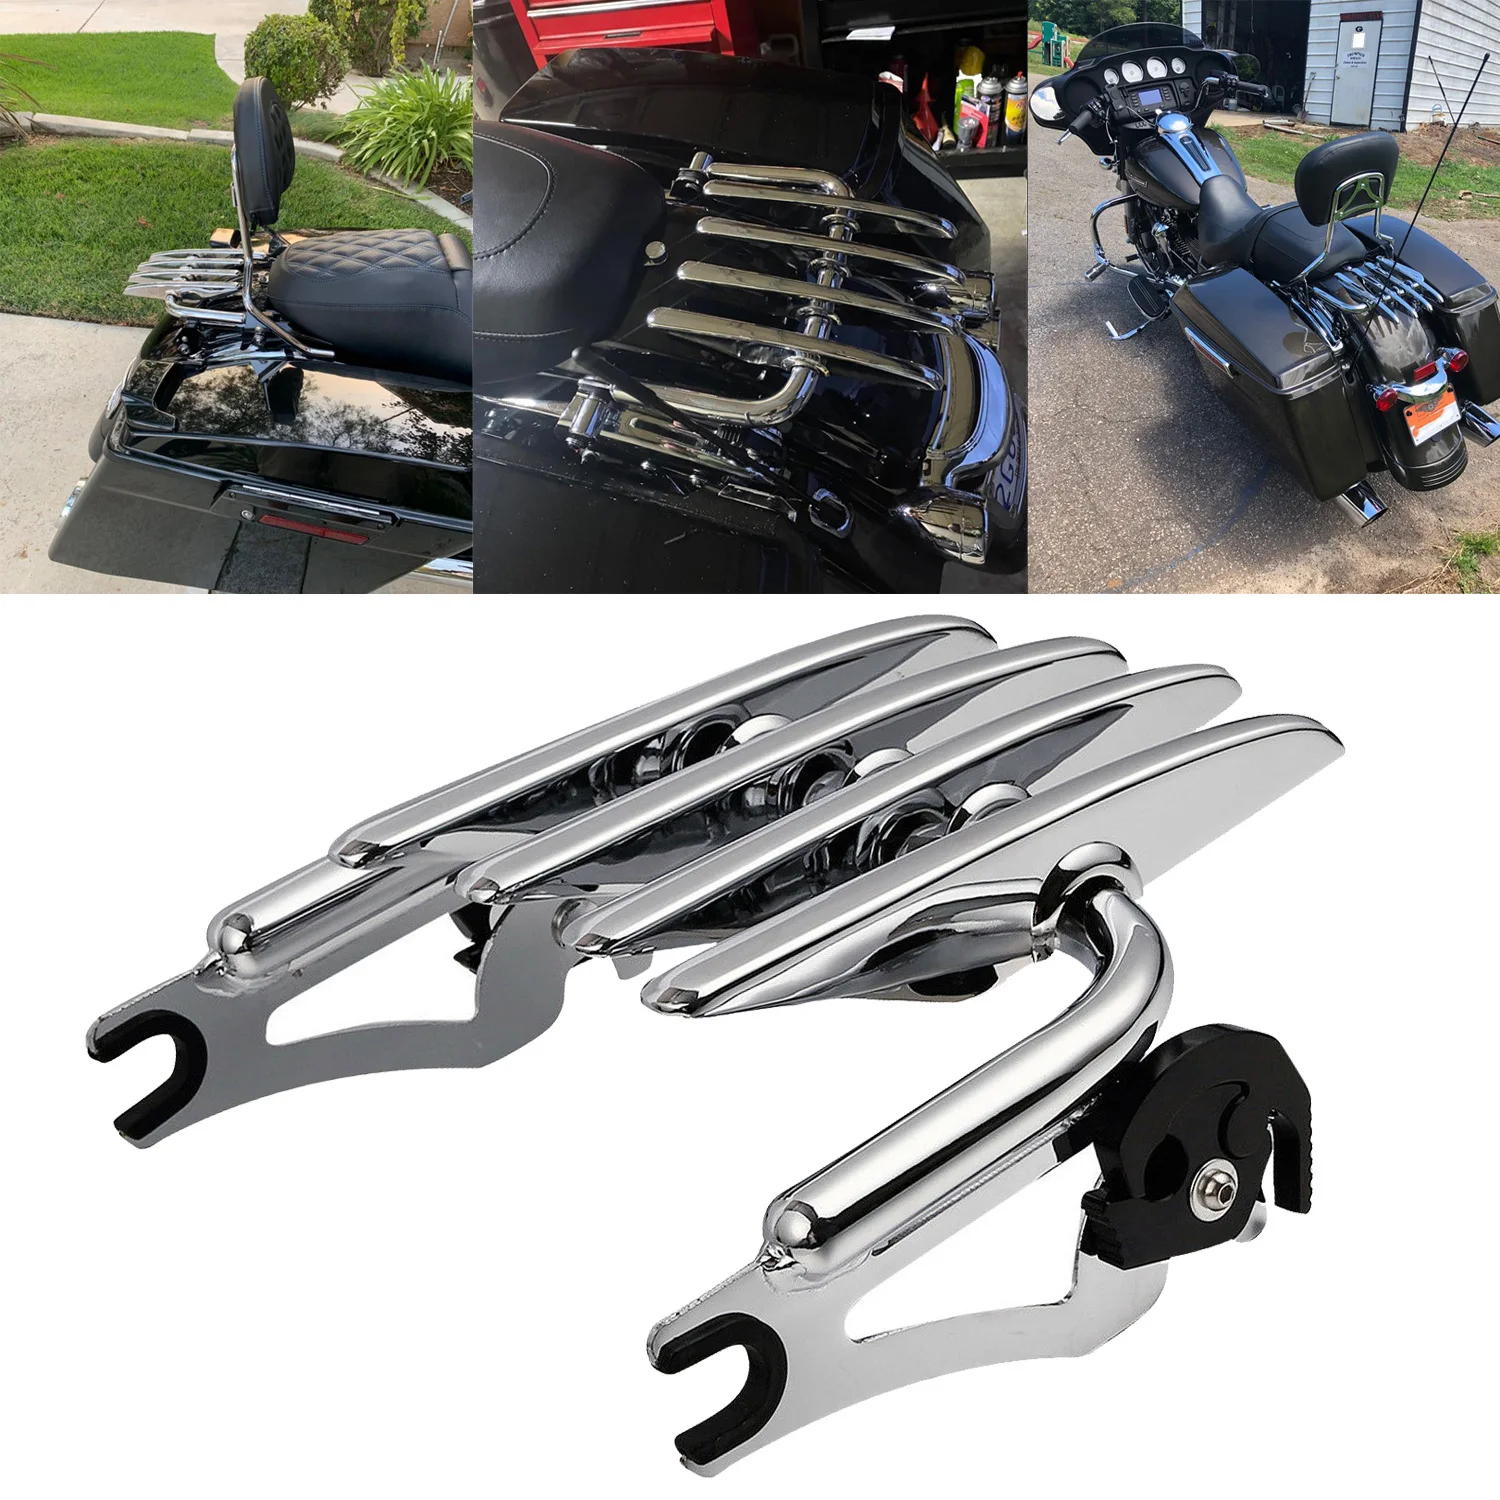 Chrome Detachable Two-Up Stealth Mounting Luggage Rack For Harley Touring Street Electra Glide Road King FLHT FLHX 2009-2023 1pcs motorcycle 3colors 7 wave windshield windscreen wind deflectors protector for harley touring flhx flht 2014 2015 2016